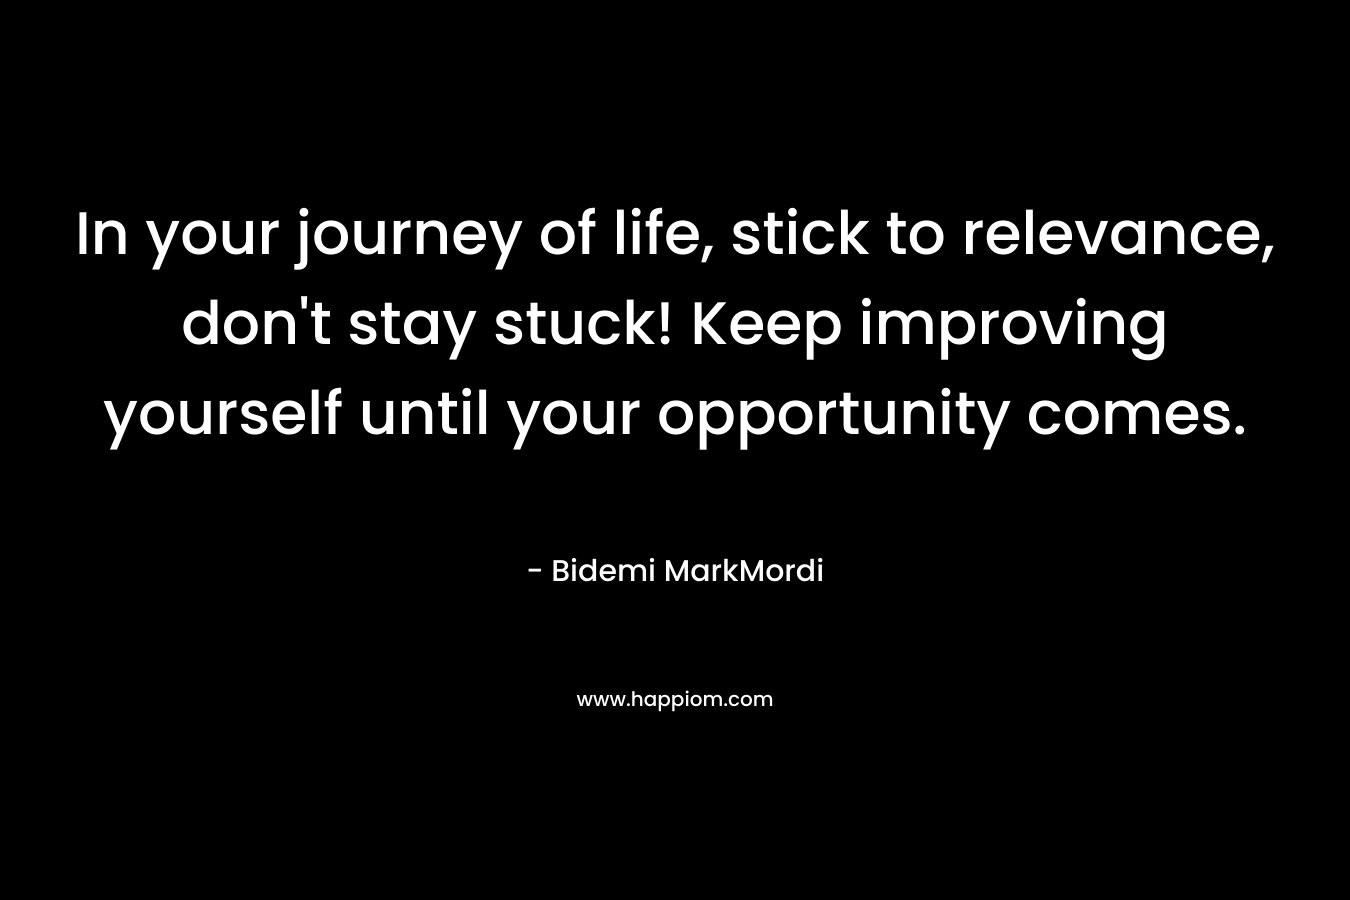 In your journey of life, stick to relevance, don't stay stuck! Keep improving yourself until your opportunity comes.